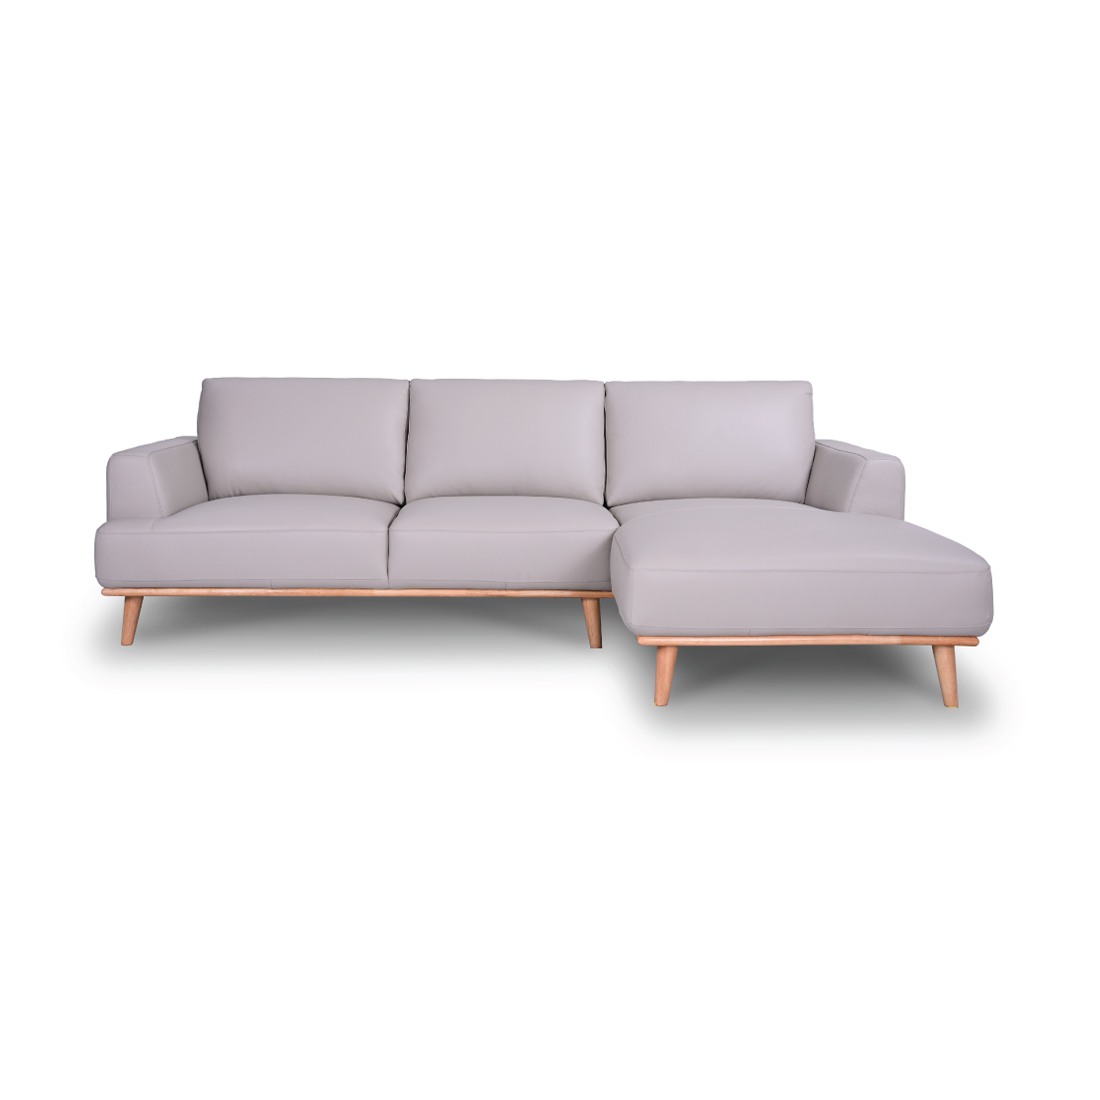 Stanford Light Grey Leather Chaise Lounge